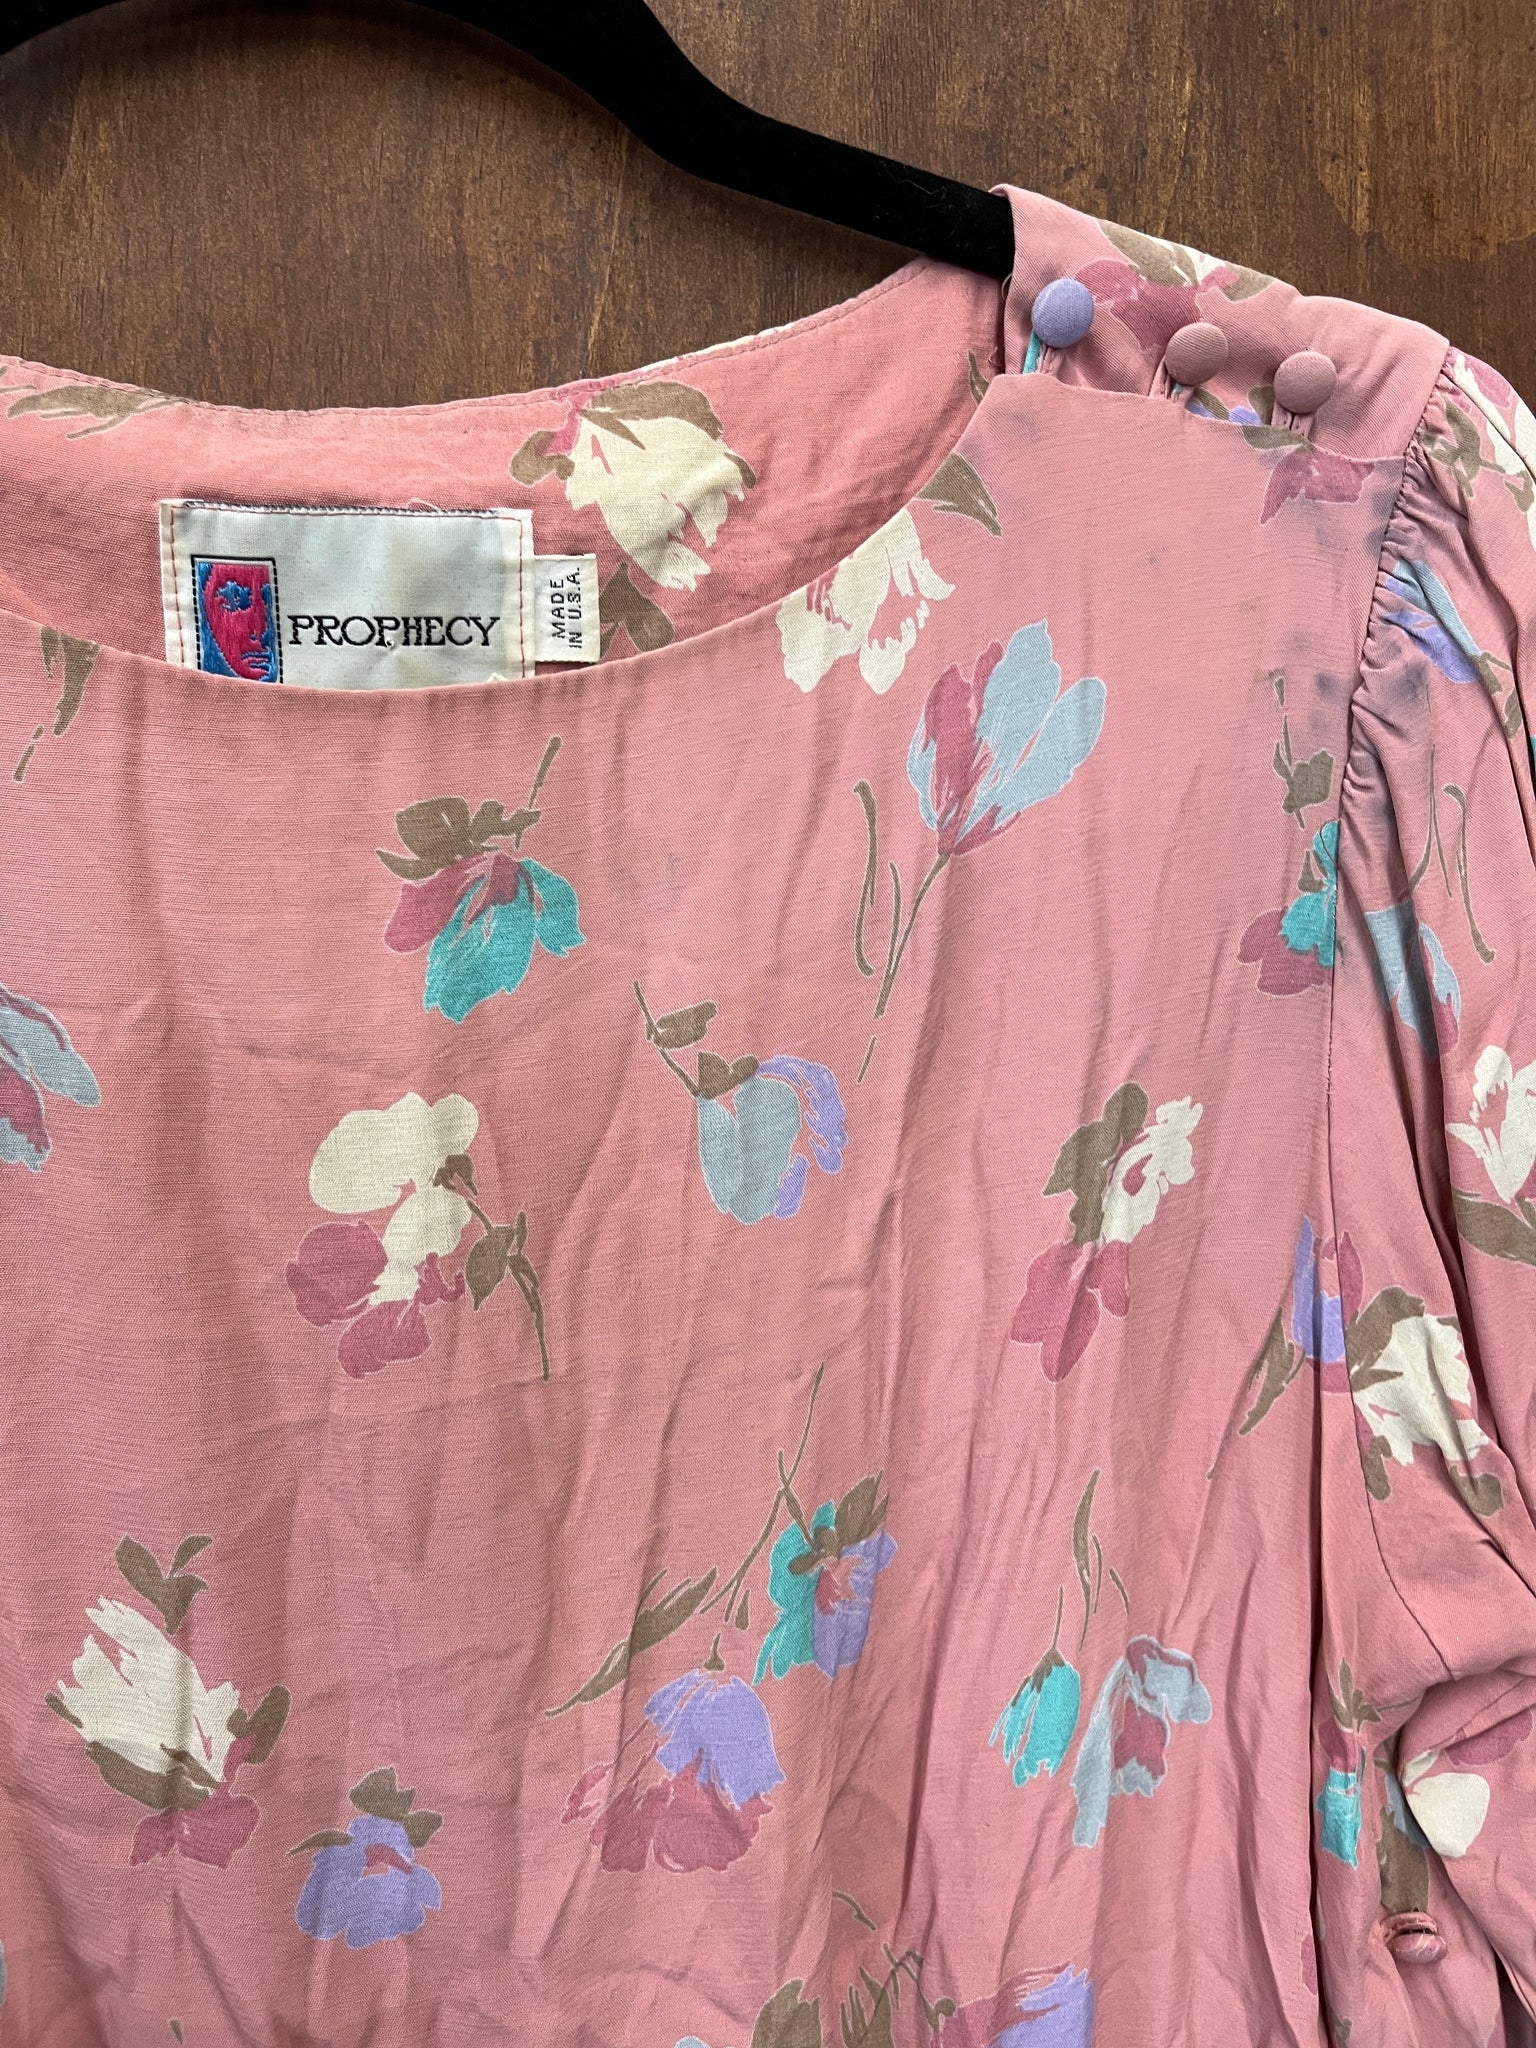 1990s TOP- Prophecy pink rayon floral banded waist